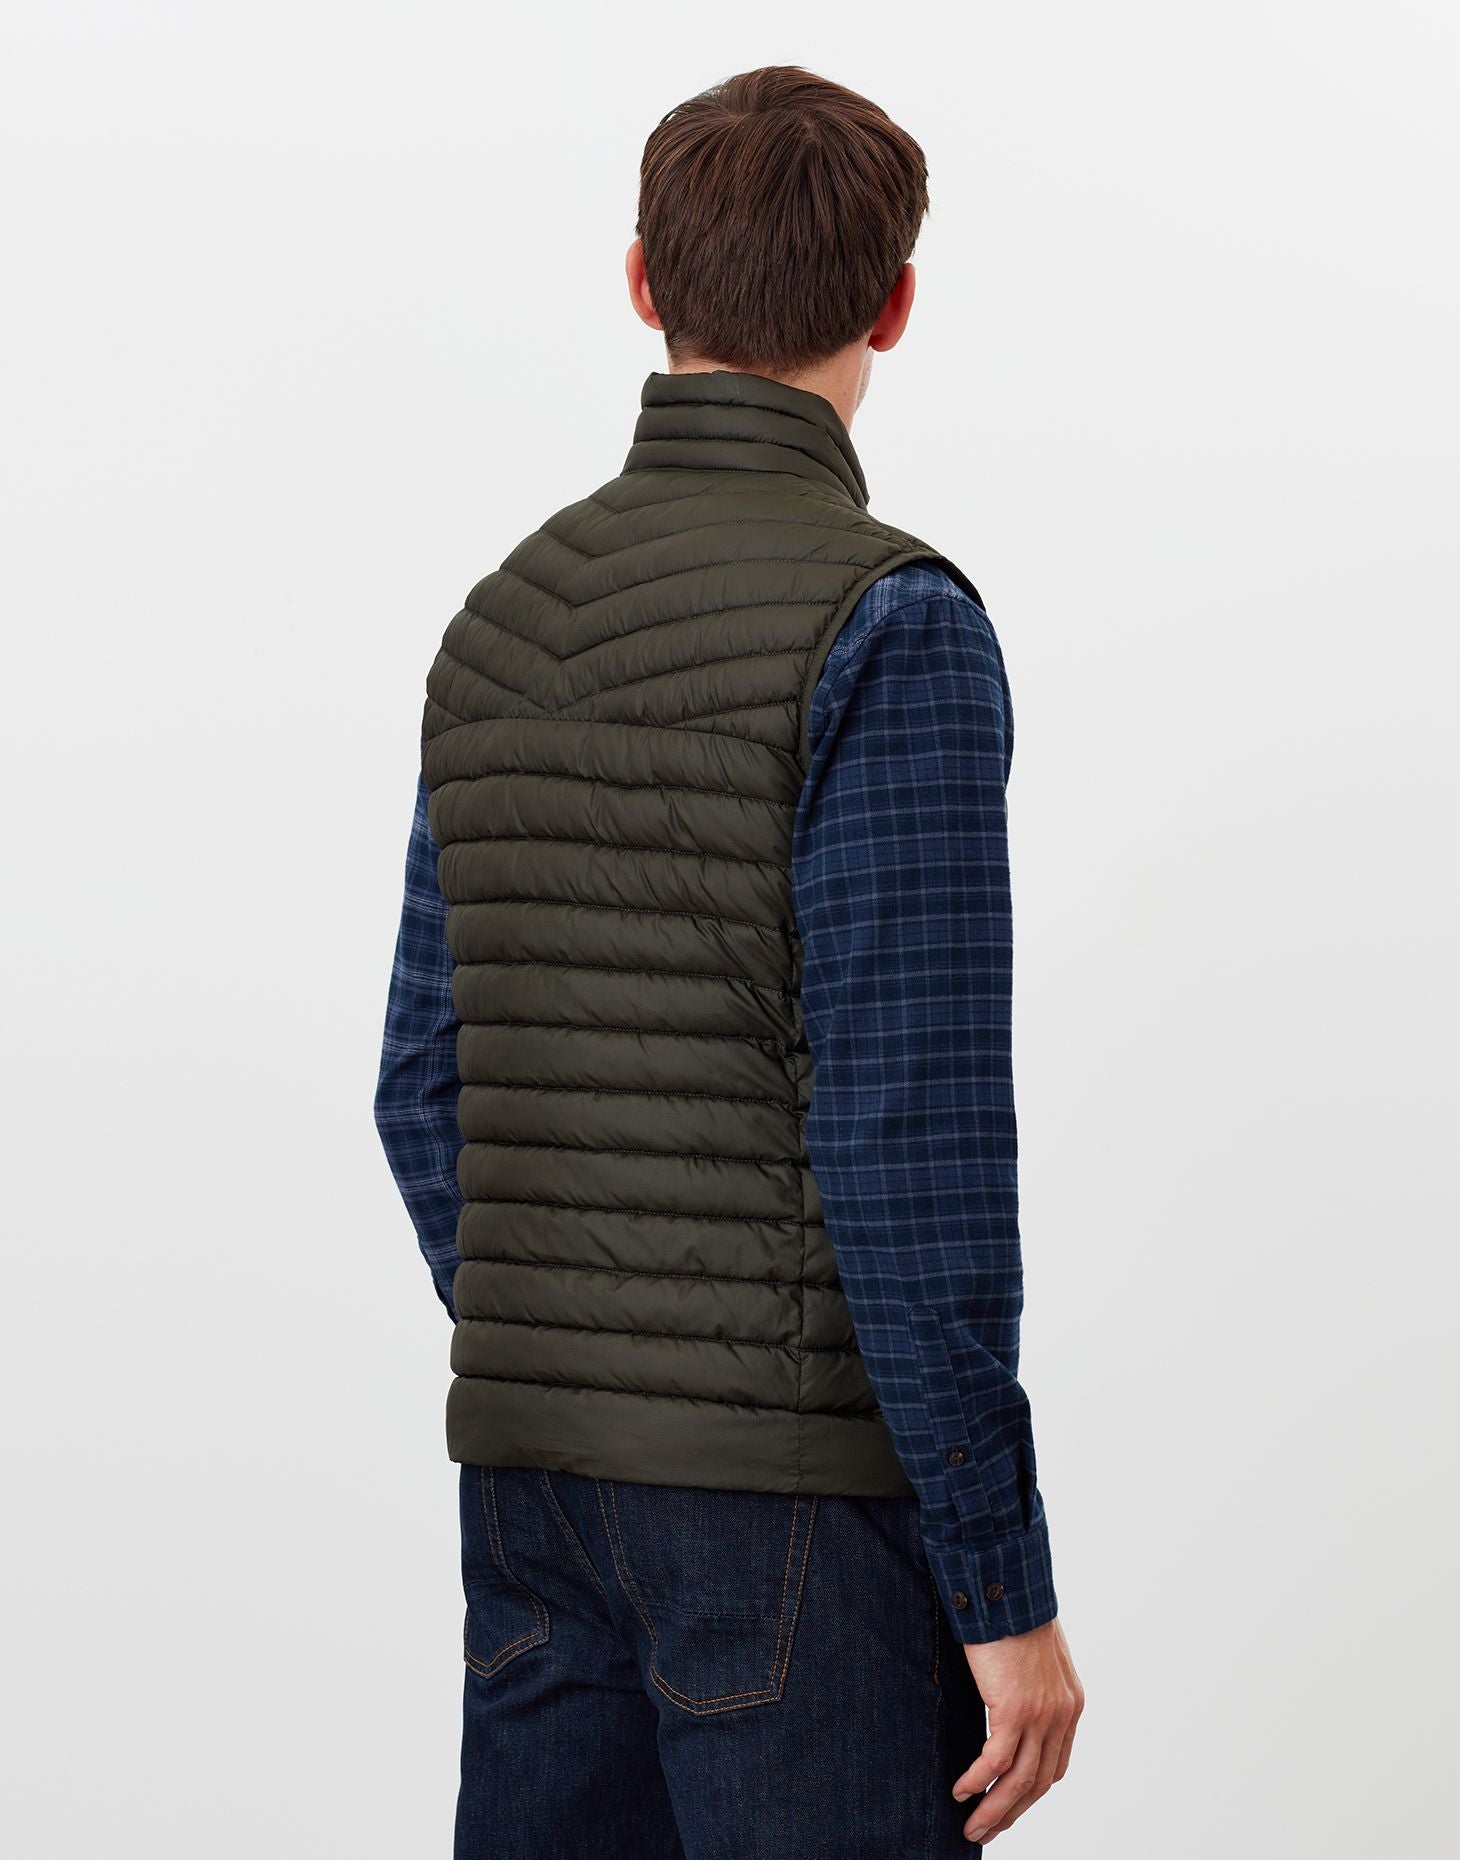 Joules - Men's Go To Gilet - Olive